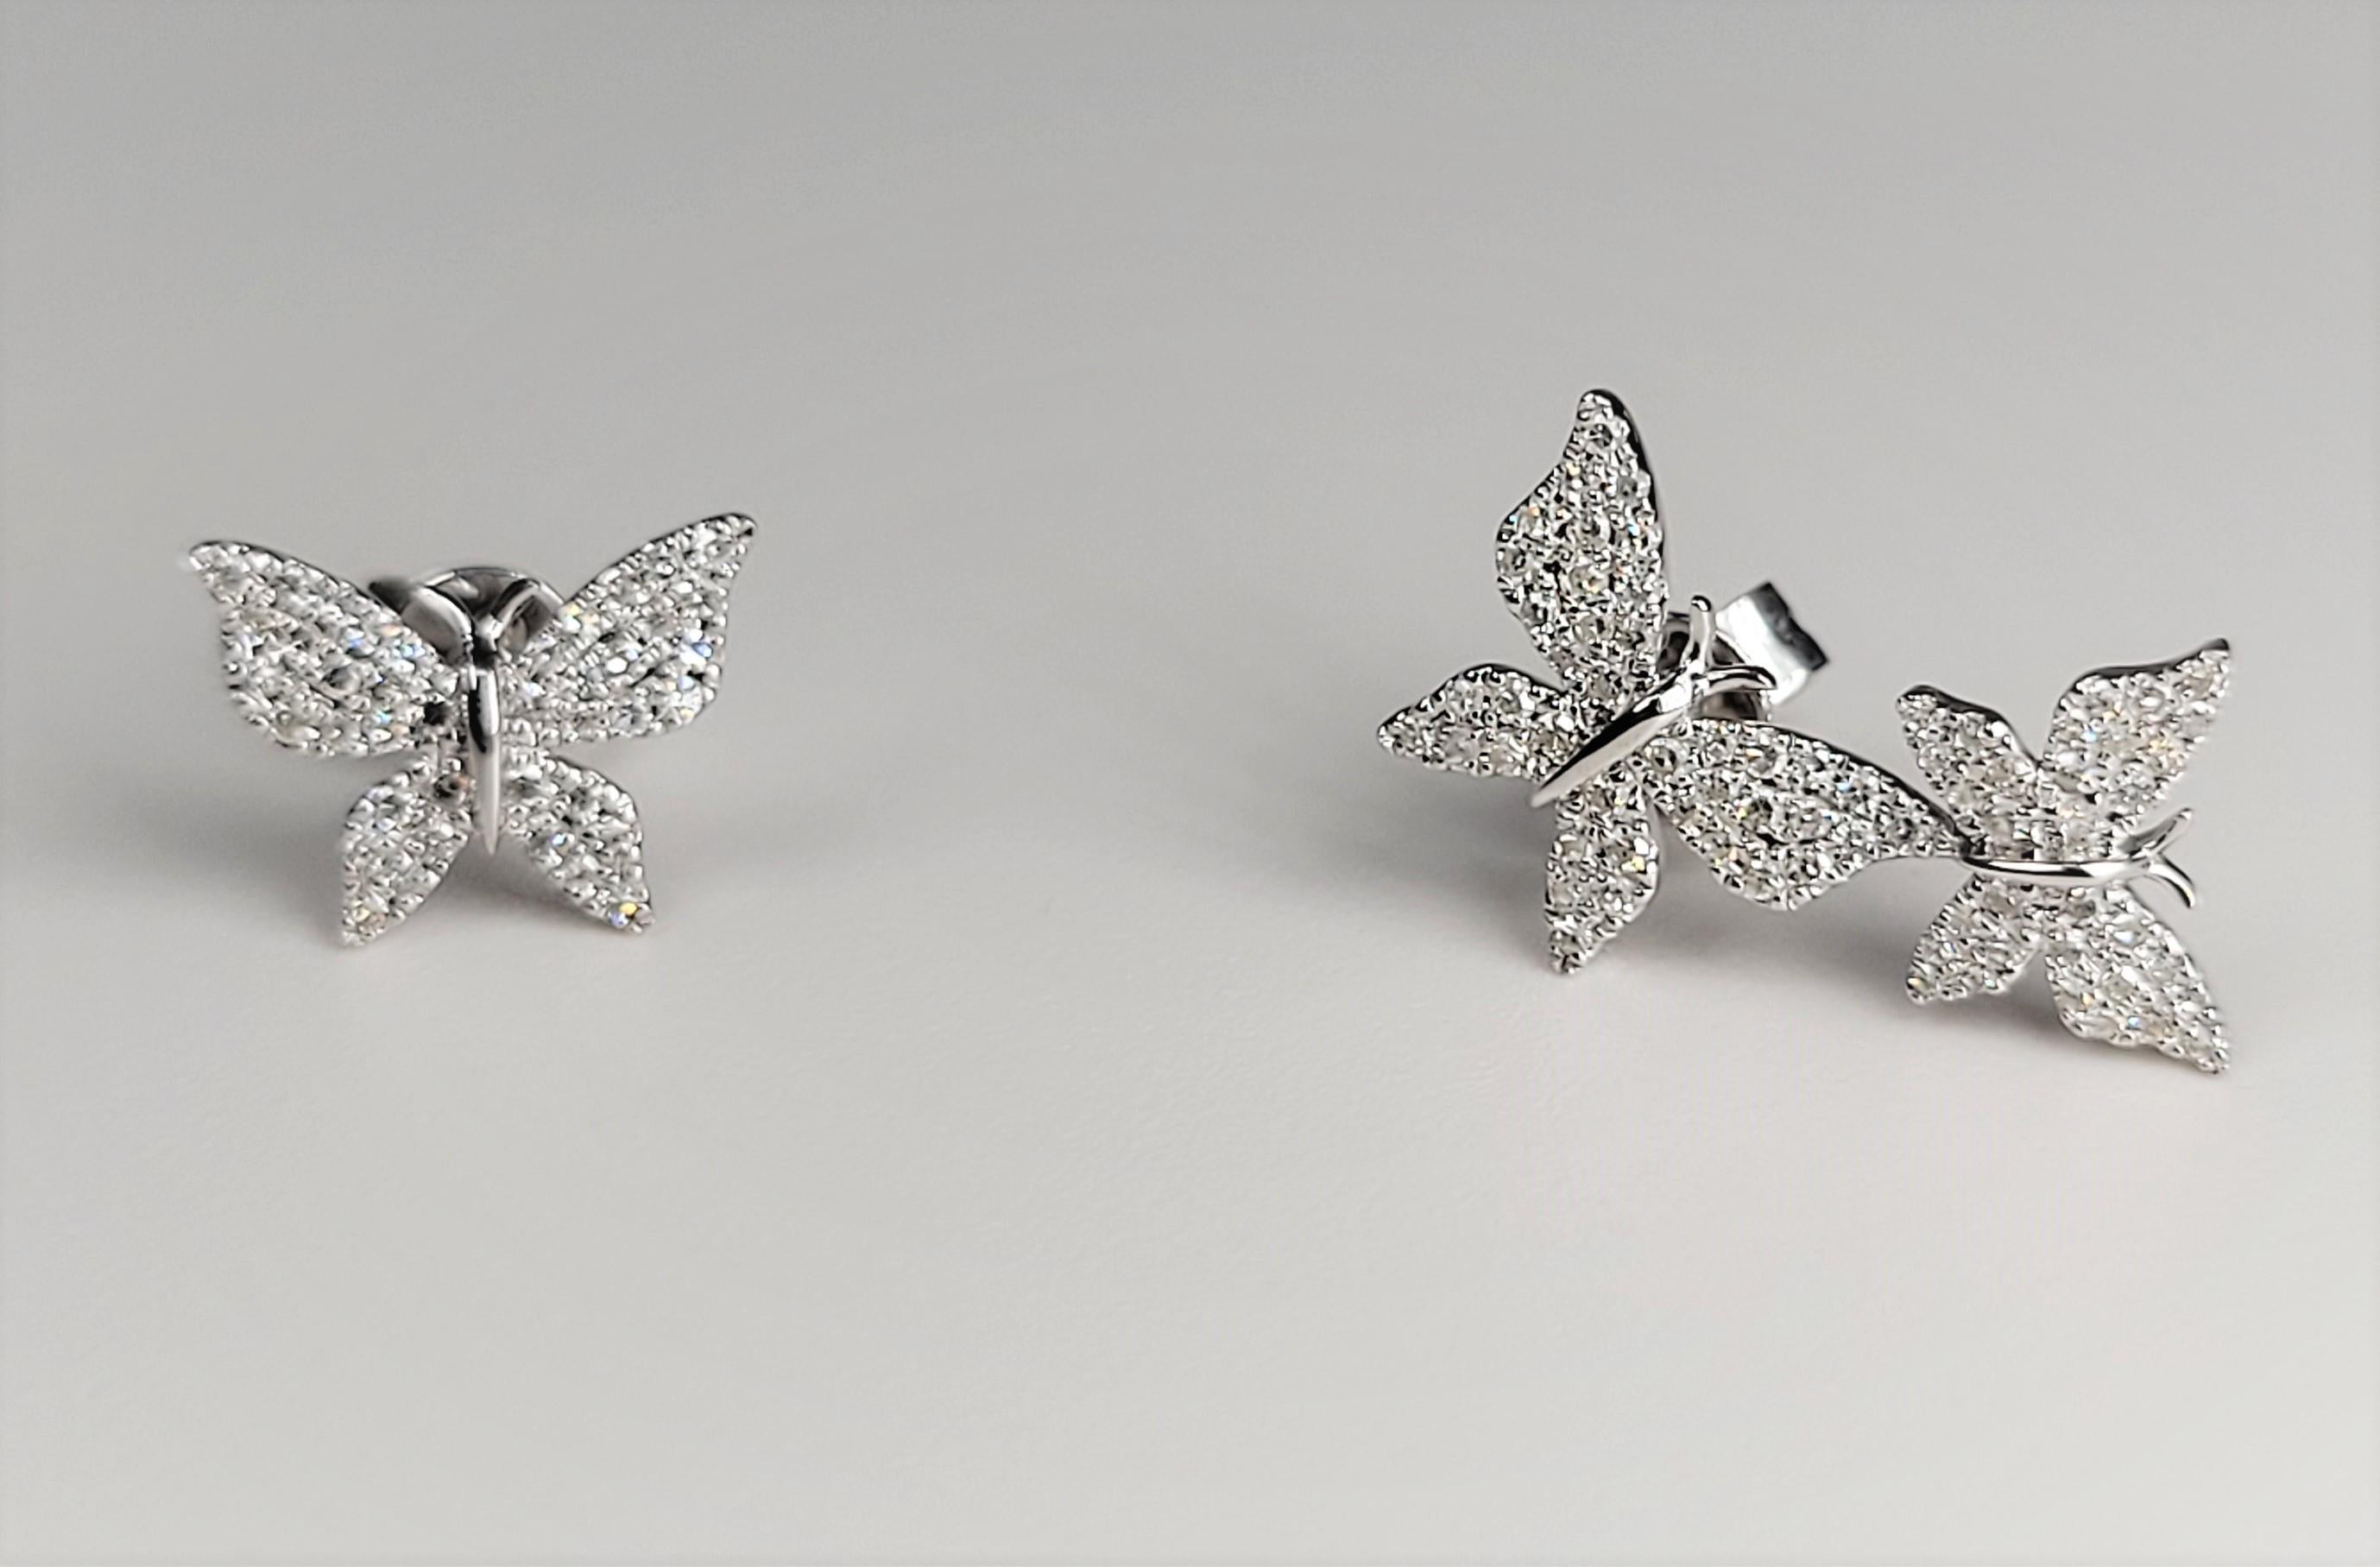 Such an unusual pair of earrings!  The double butterflies on one ear are eye catching!  In 14 Karat White Gold. 